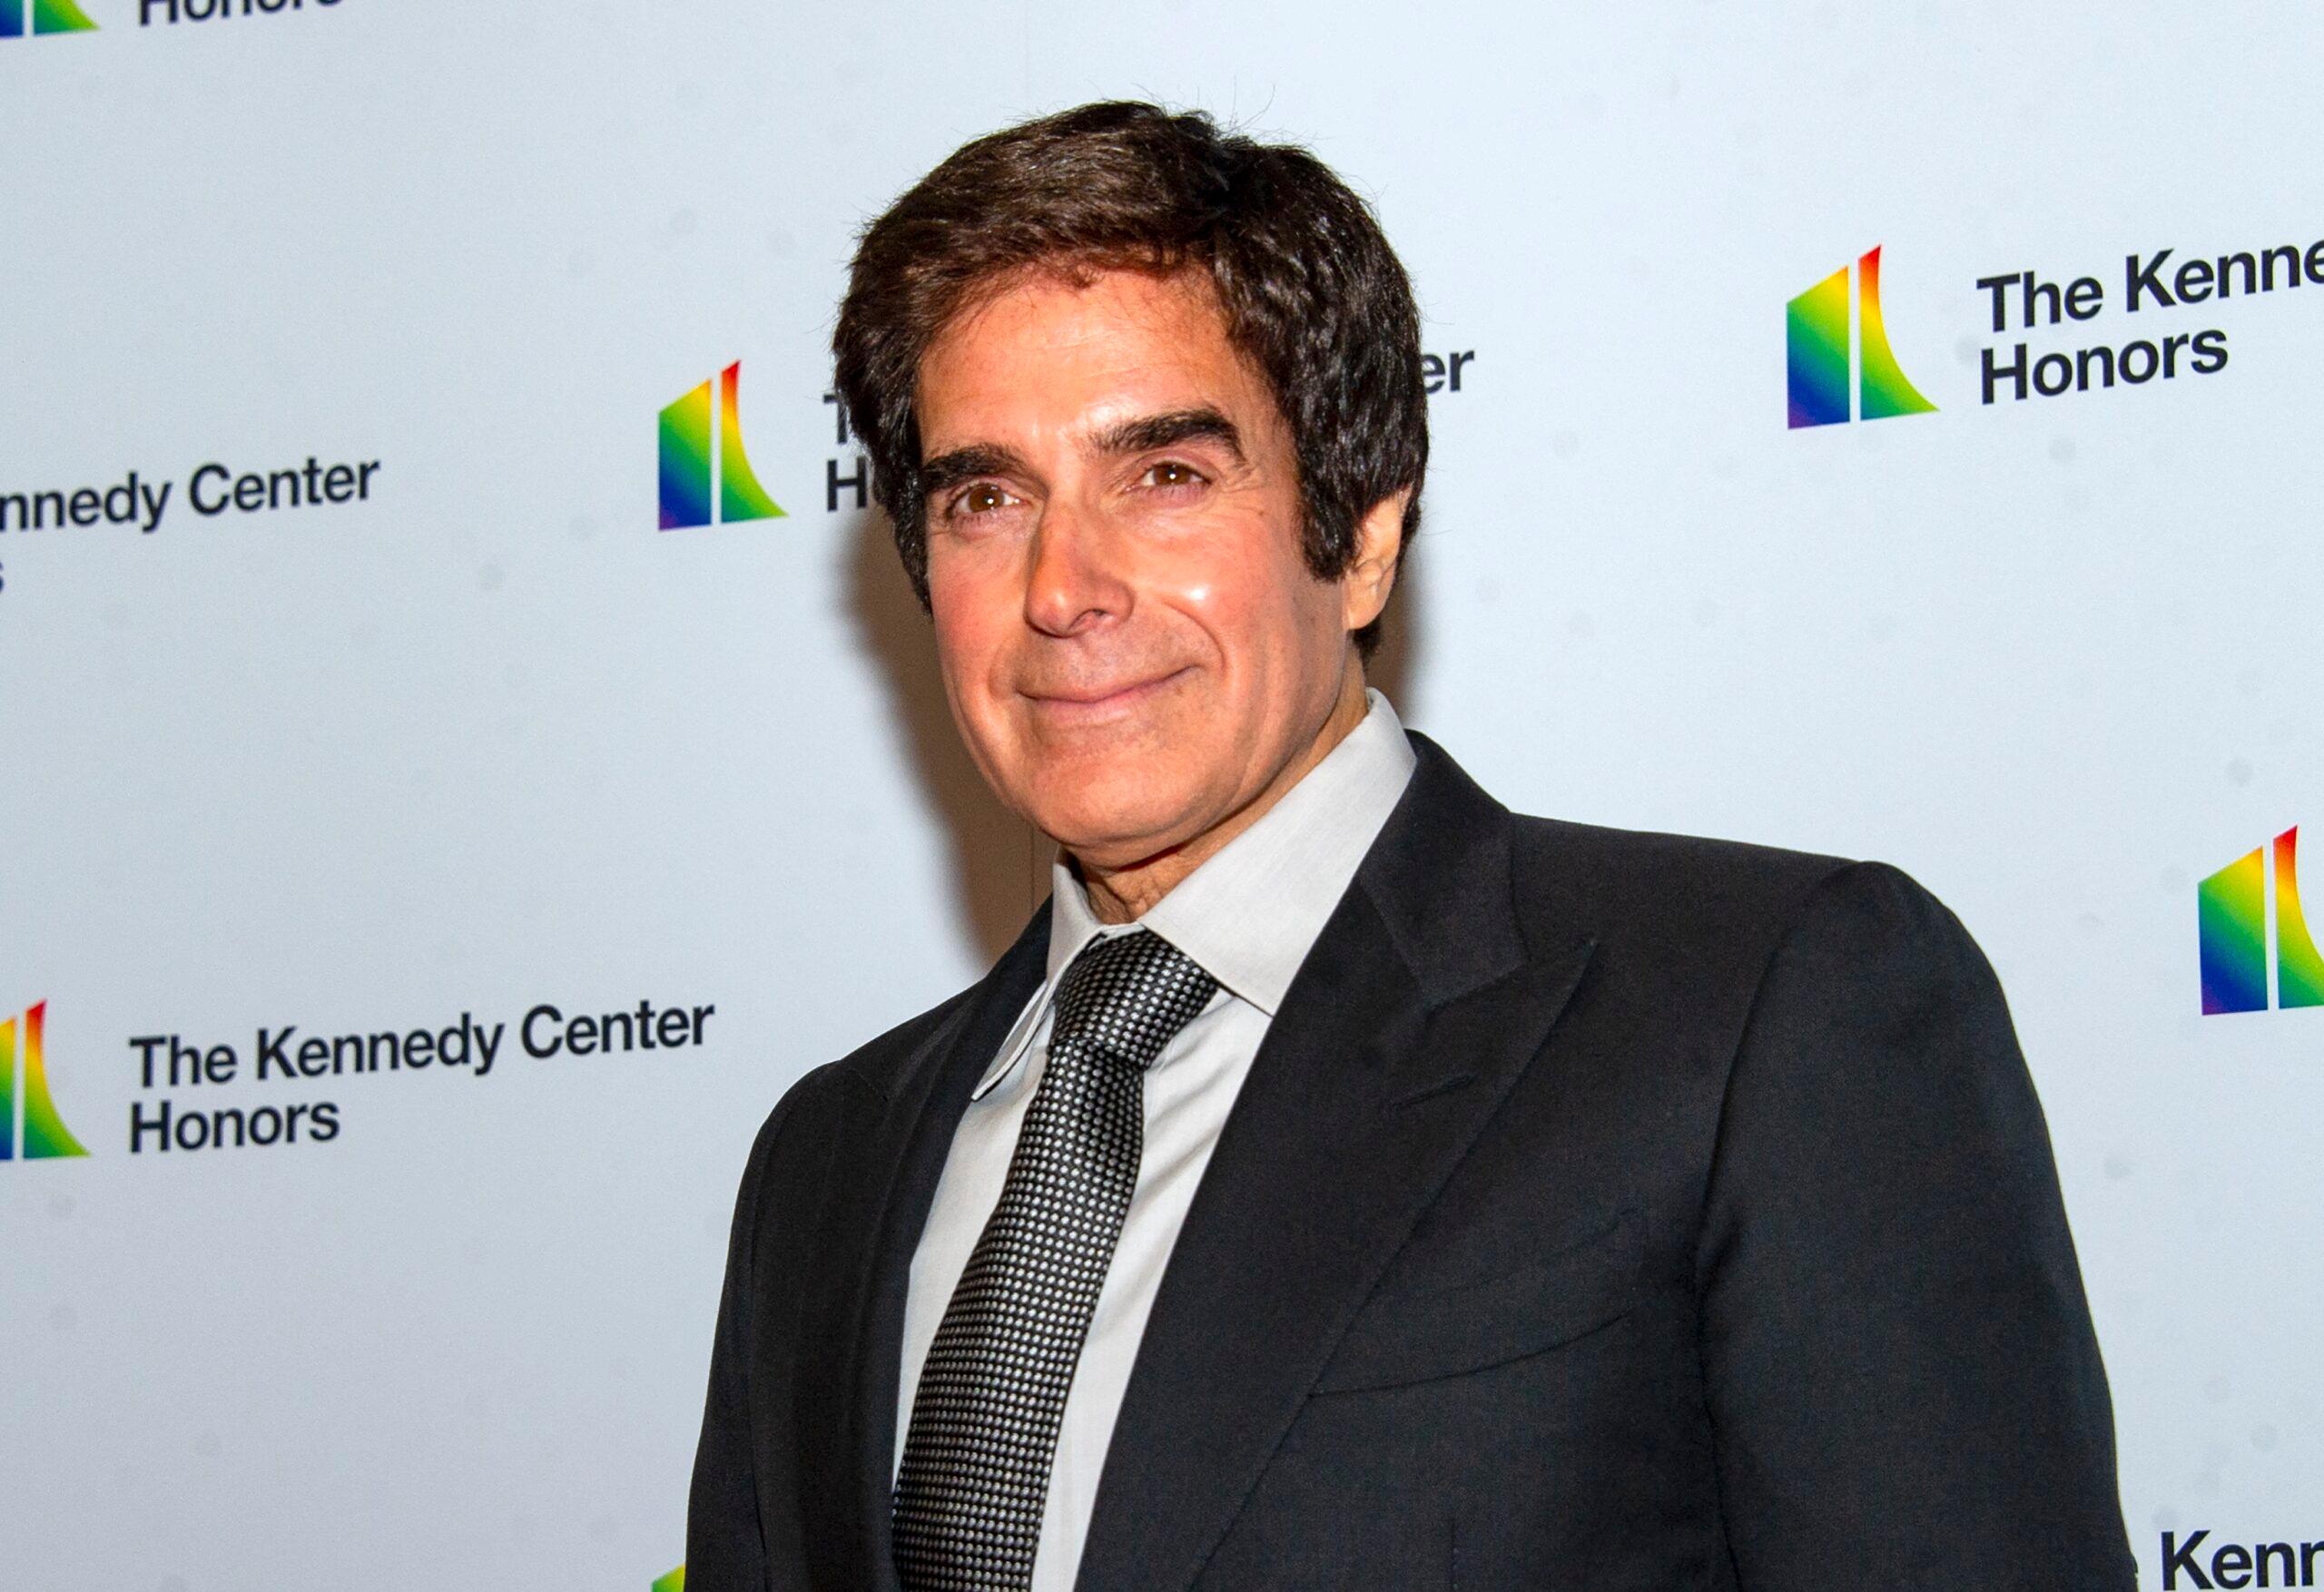 David Copperfield, Michael Jackson Among Big Names Named In Jeffrey Epstein's List 